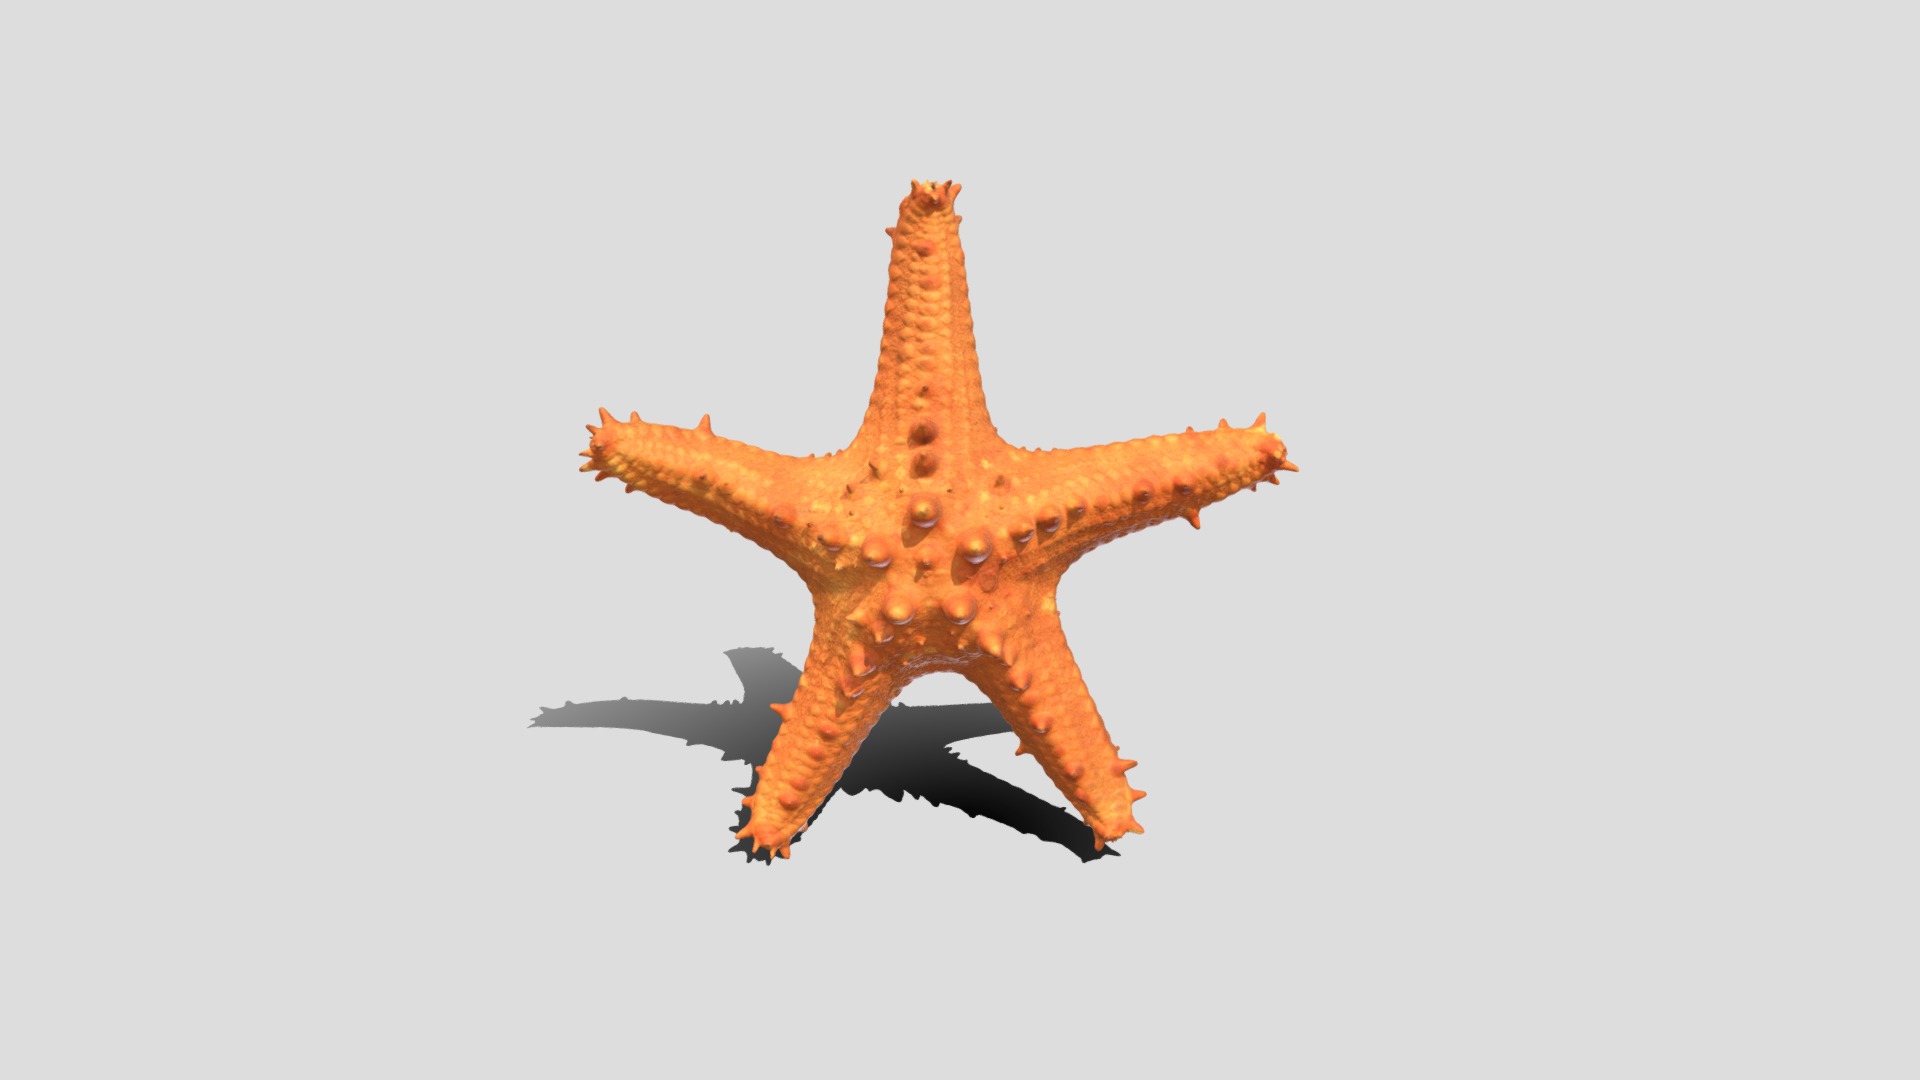 3D model Orange Starfish - This is a 3D model of the Orange Starfish. The 3D model is about a starfish on a white background.